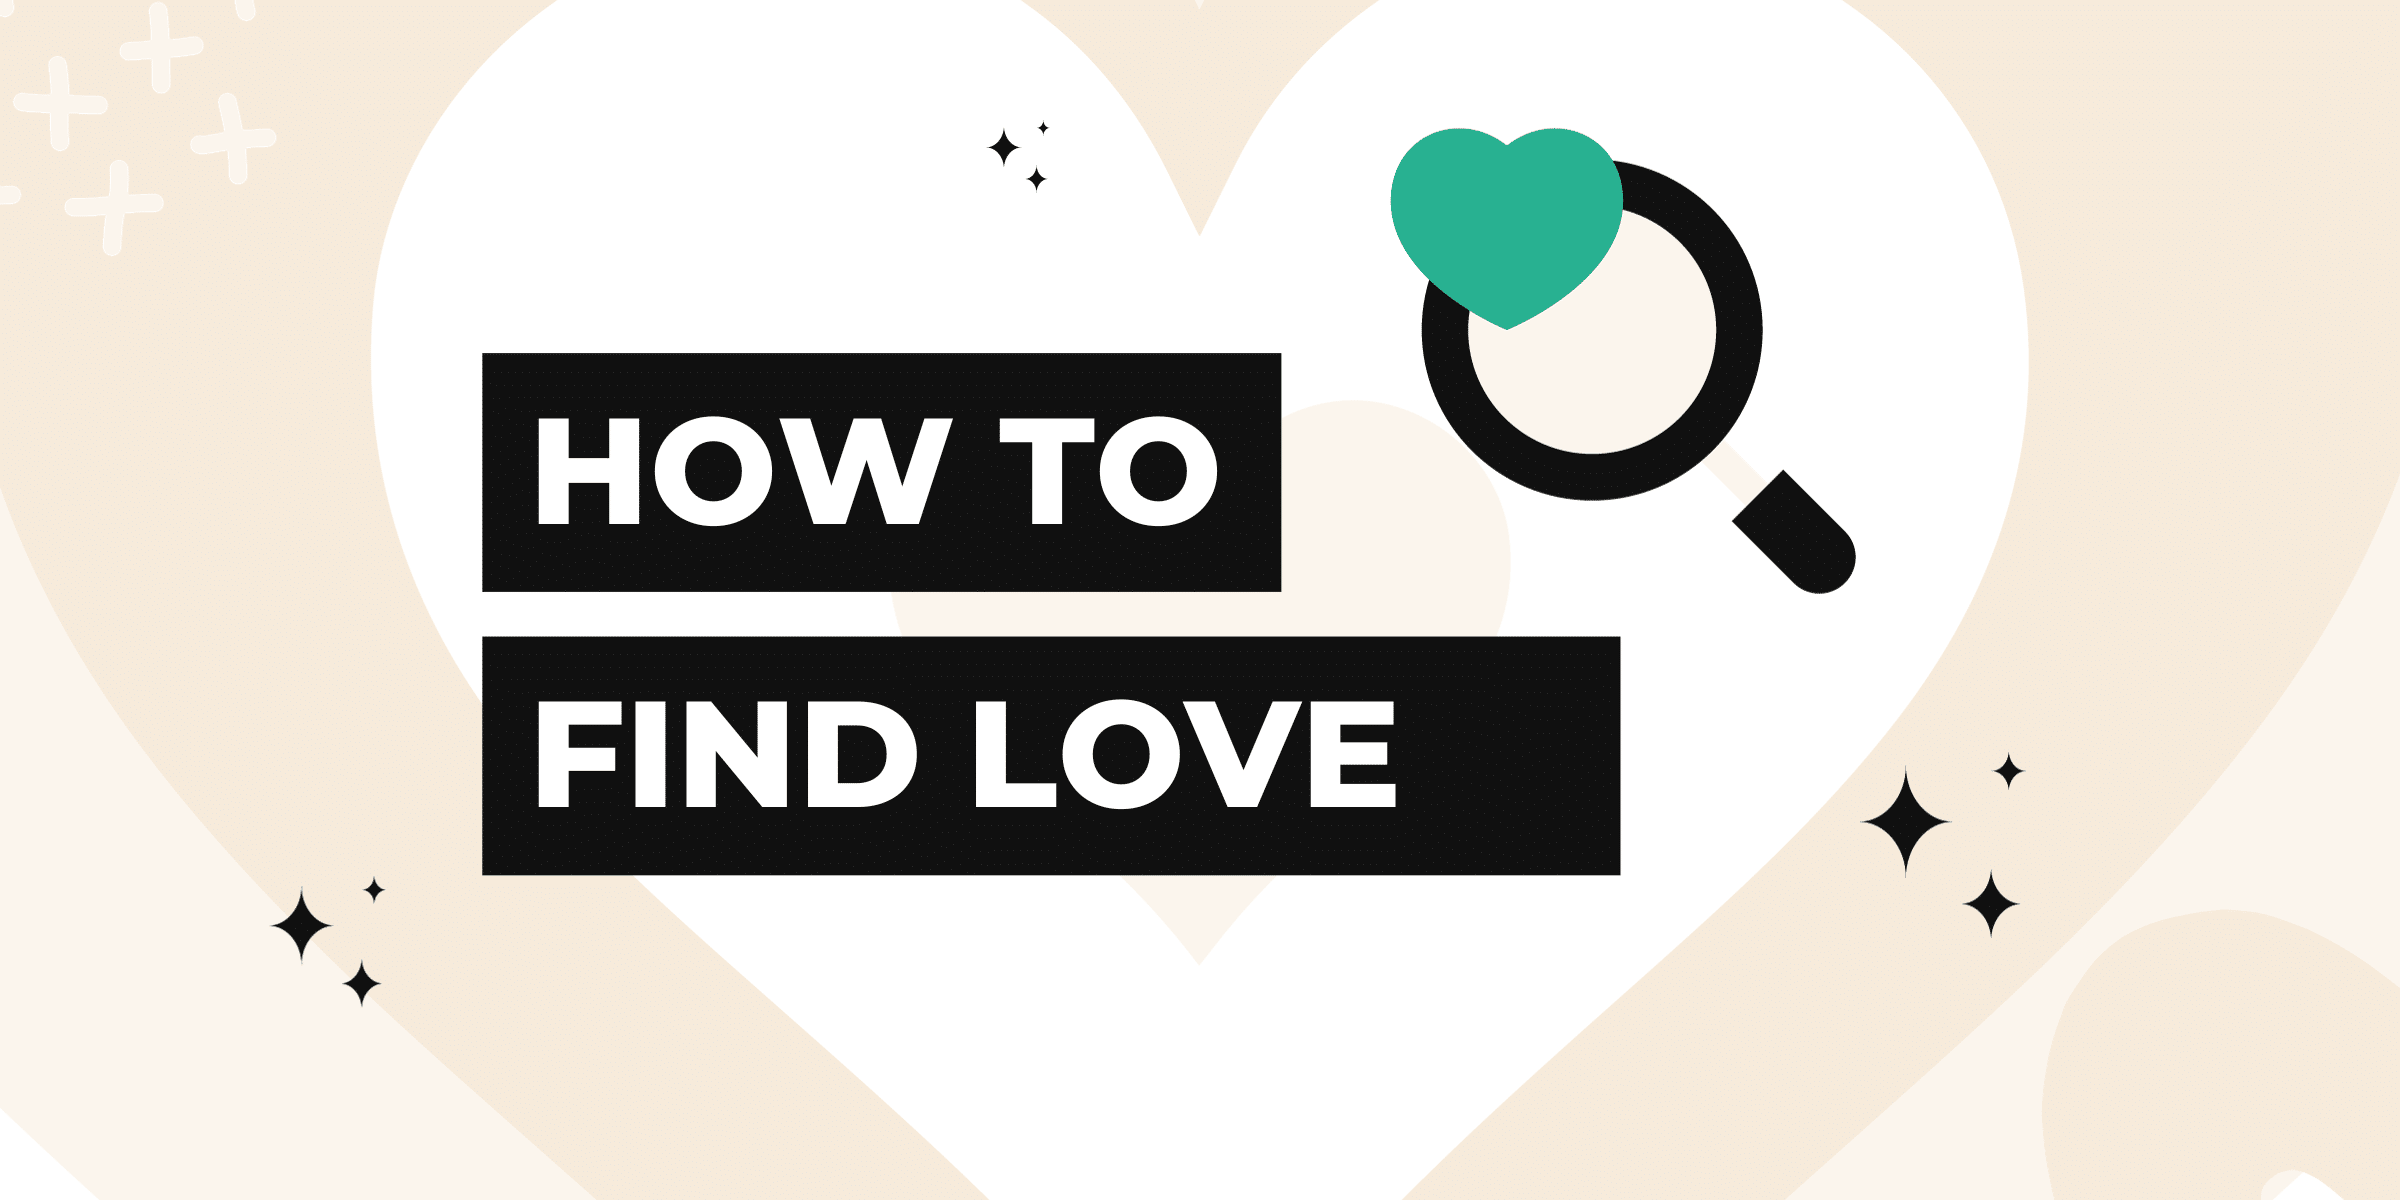 Finding true love can be tricky, but it’s certainly not impossible! We offer all the best advice on how to get into a relationship with your perfect match.